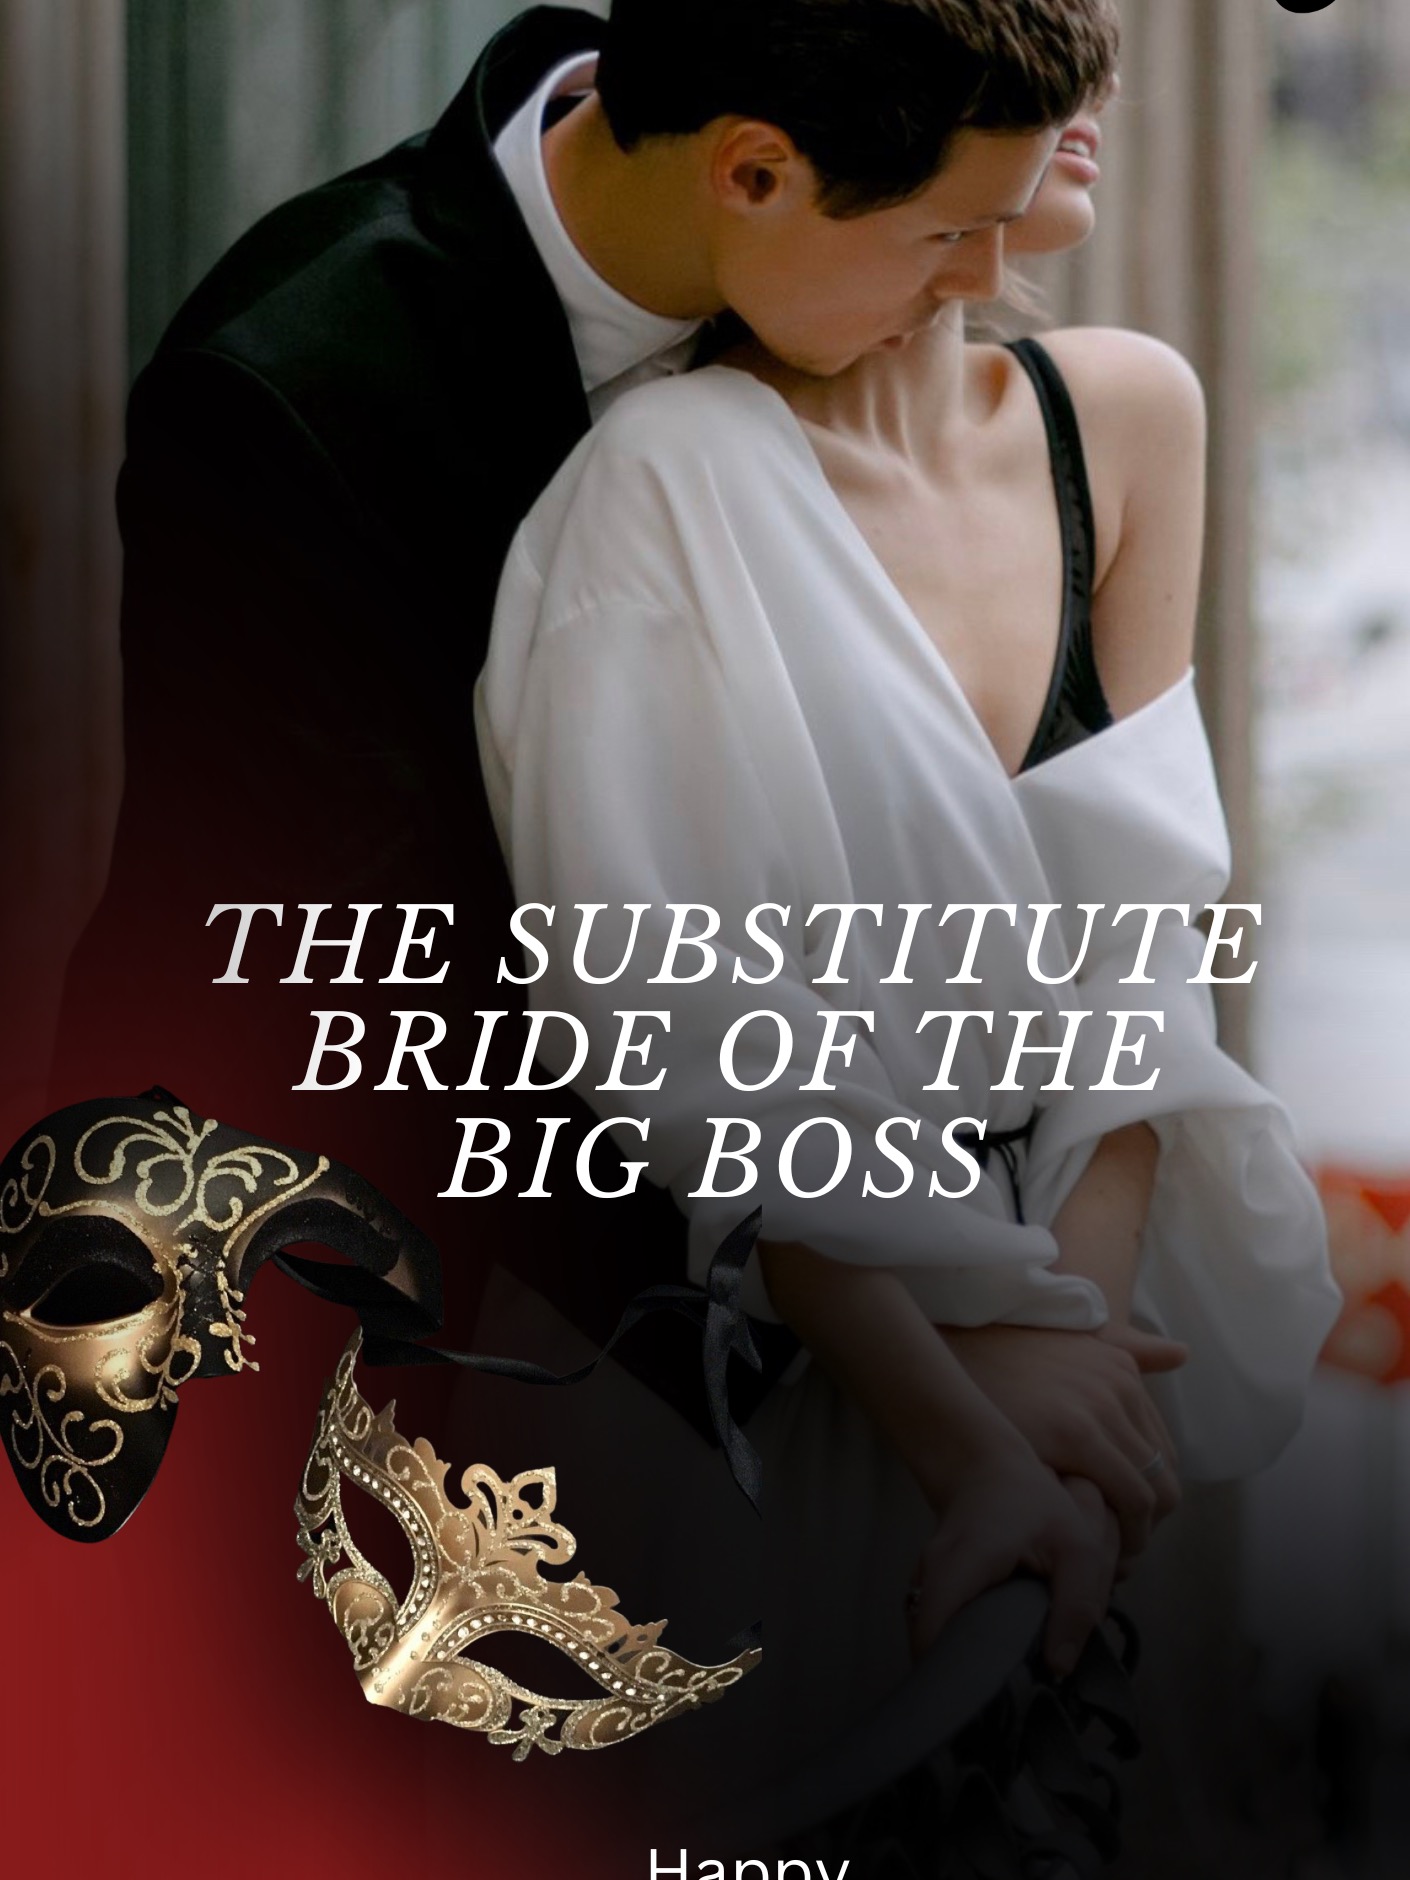 THE SUBSTITUTE BRIDE OF THE BIG BOSS